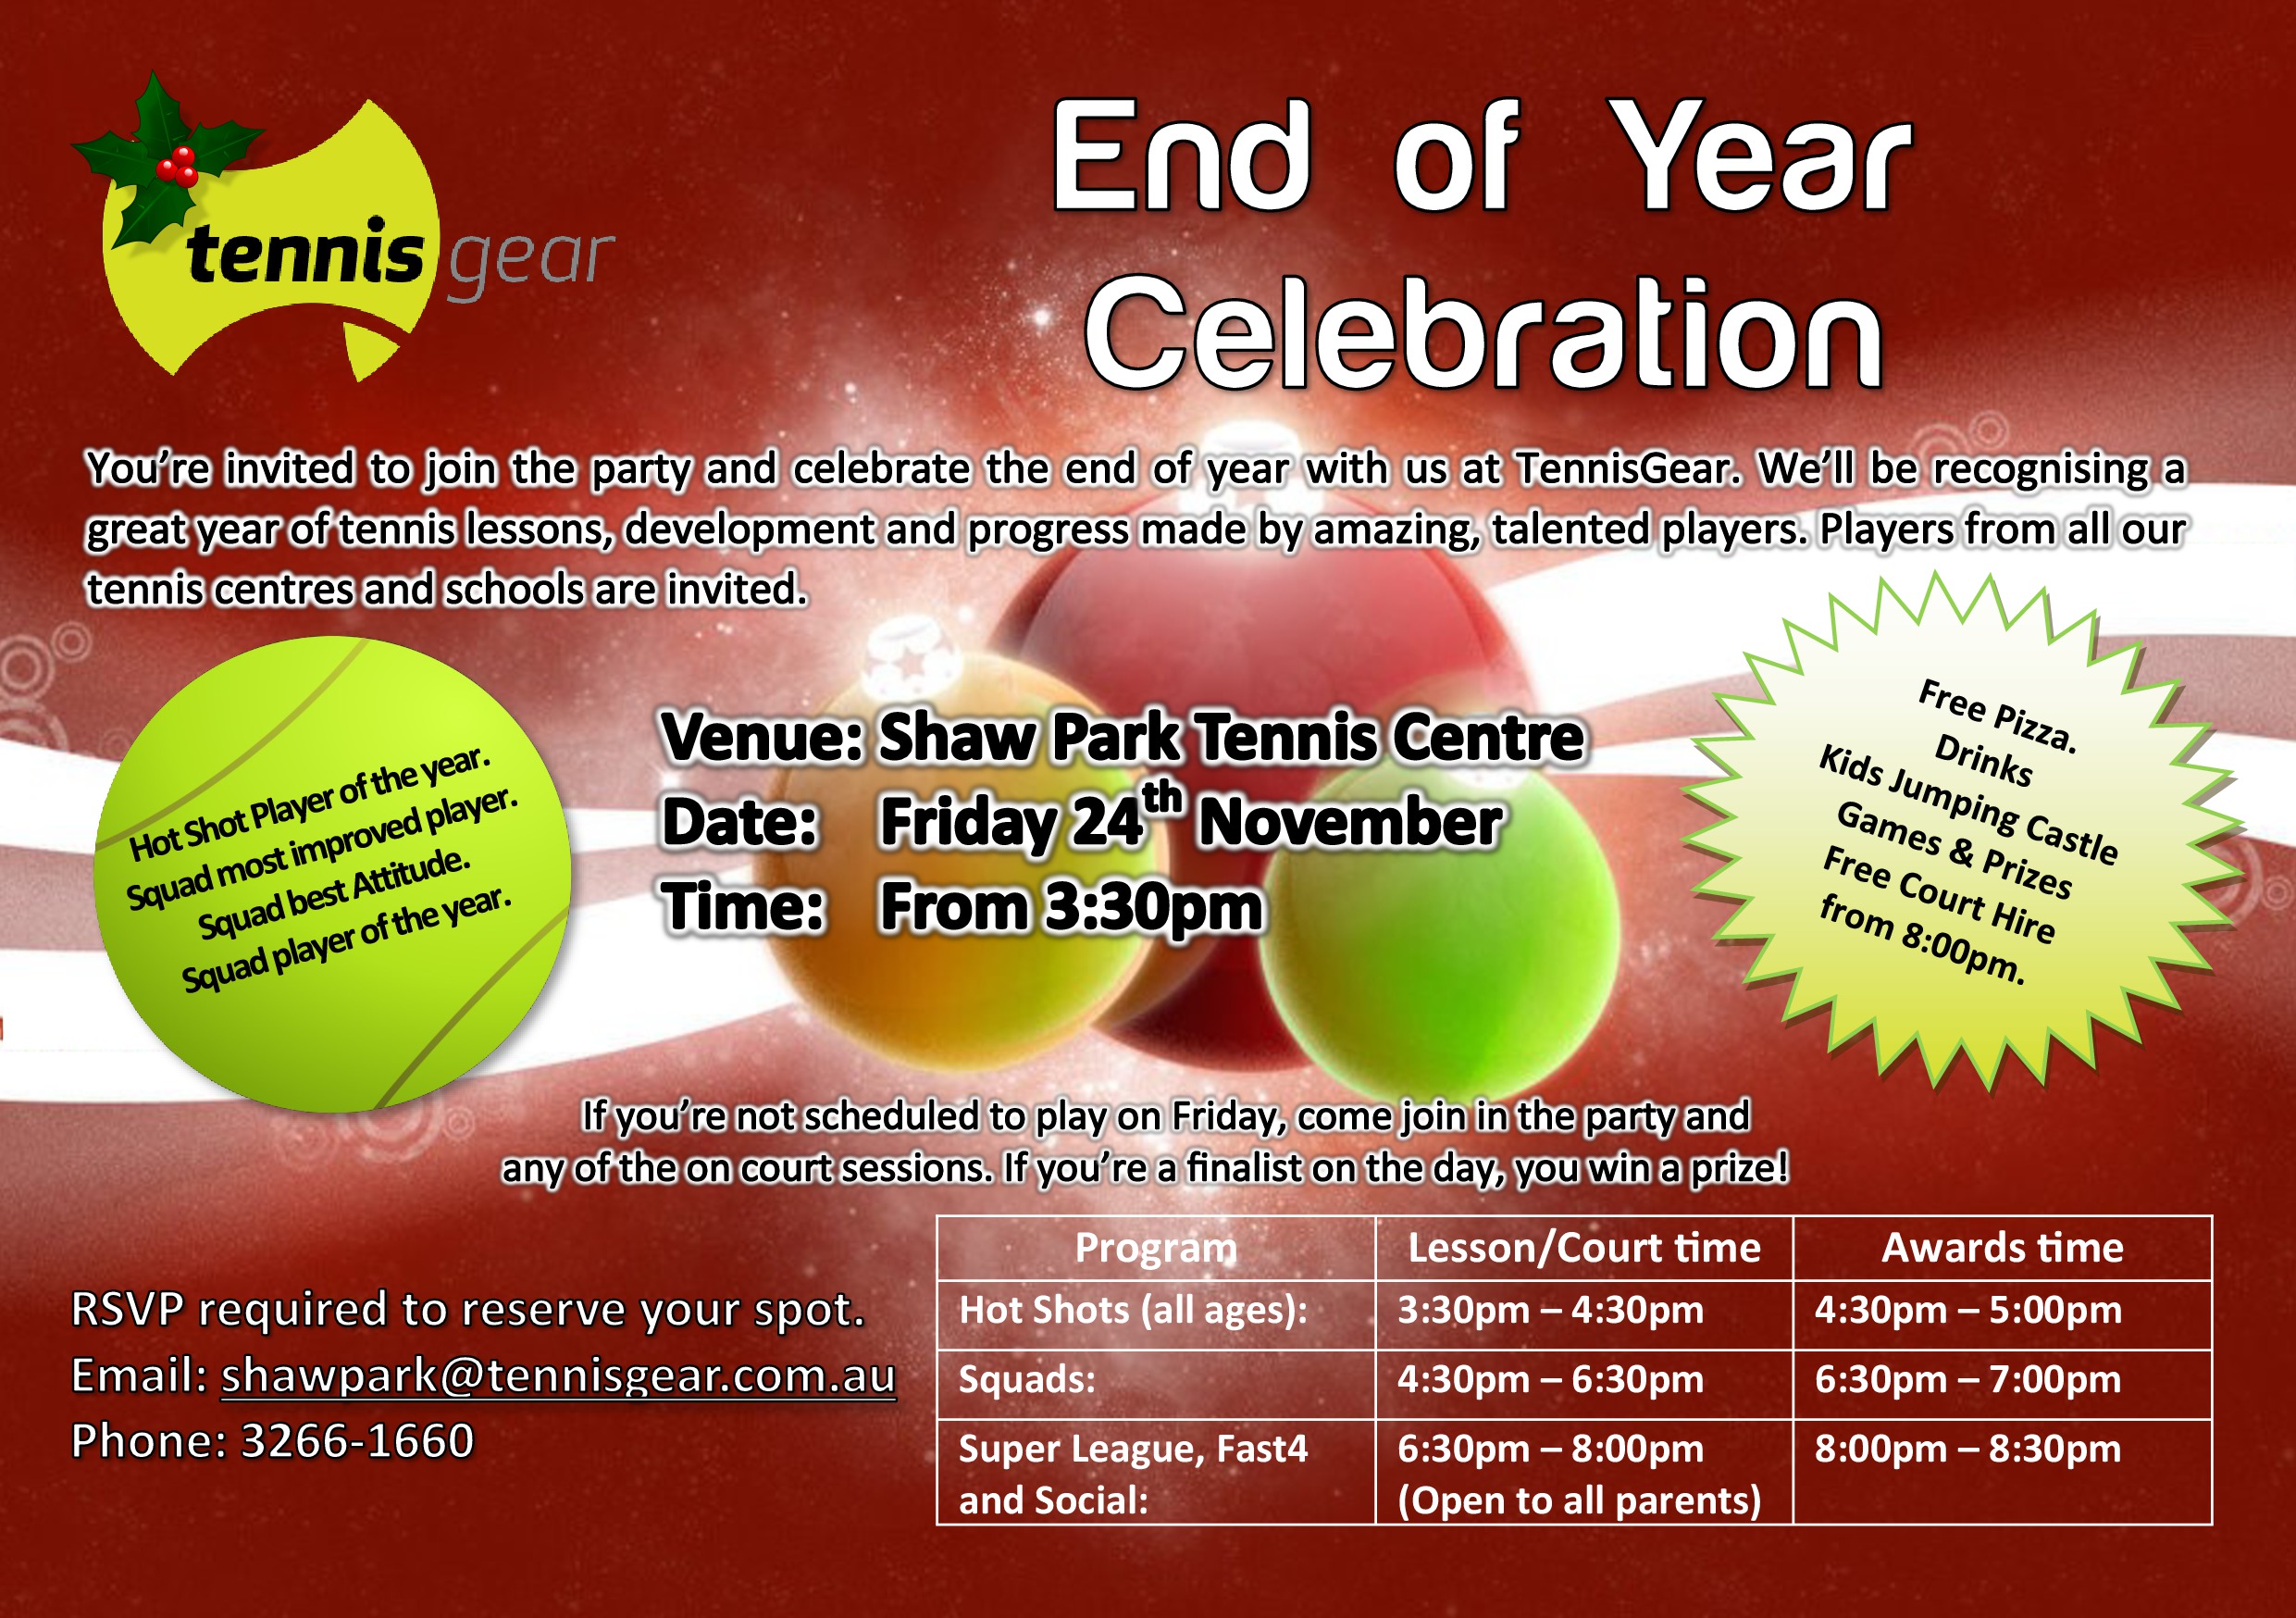 End of Year Tennis Celebration